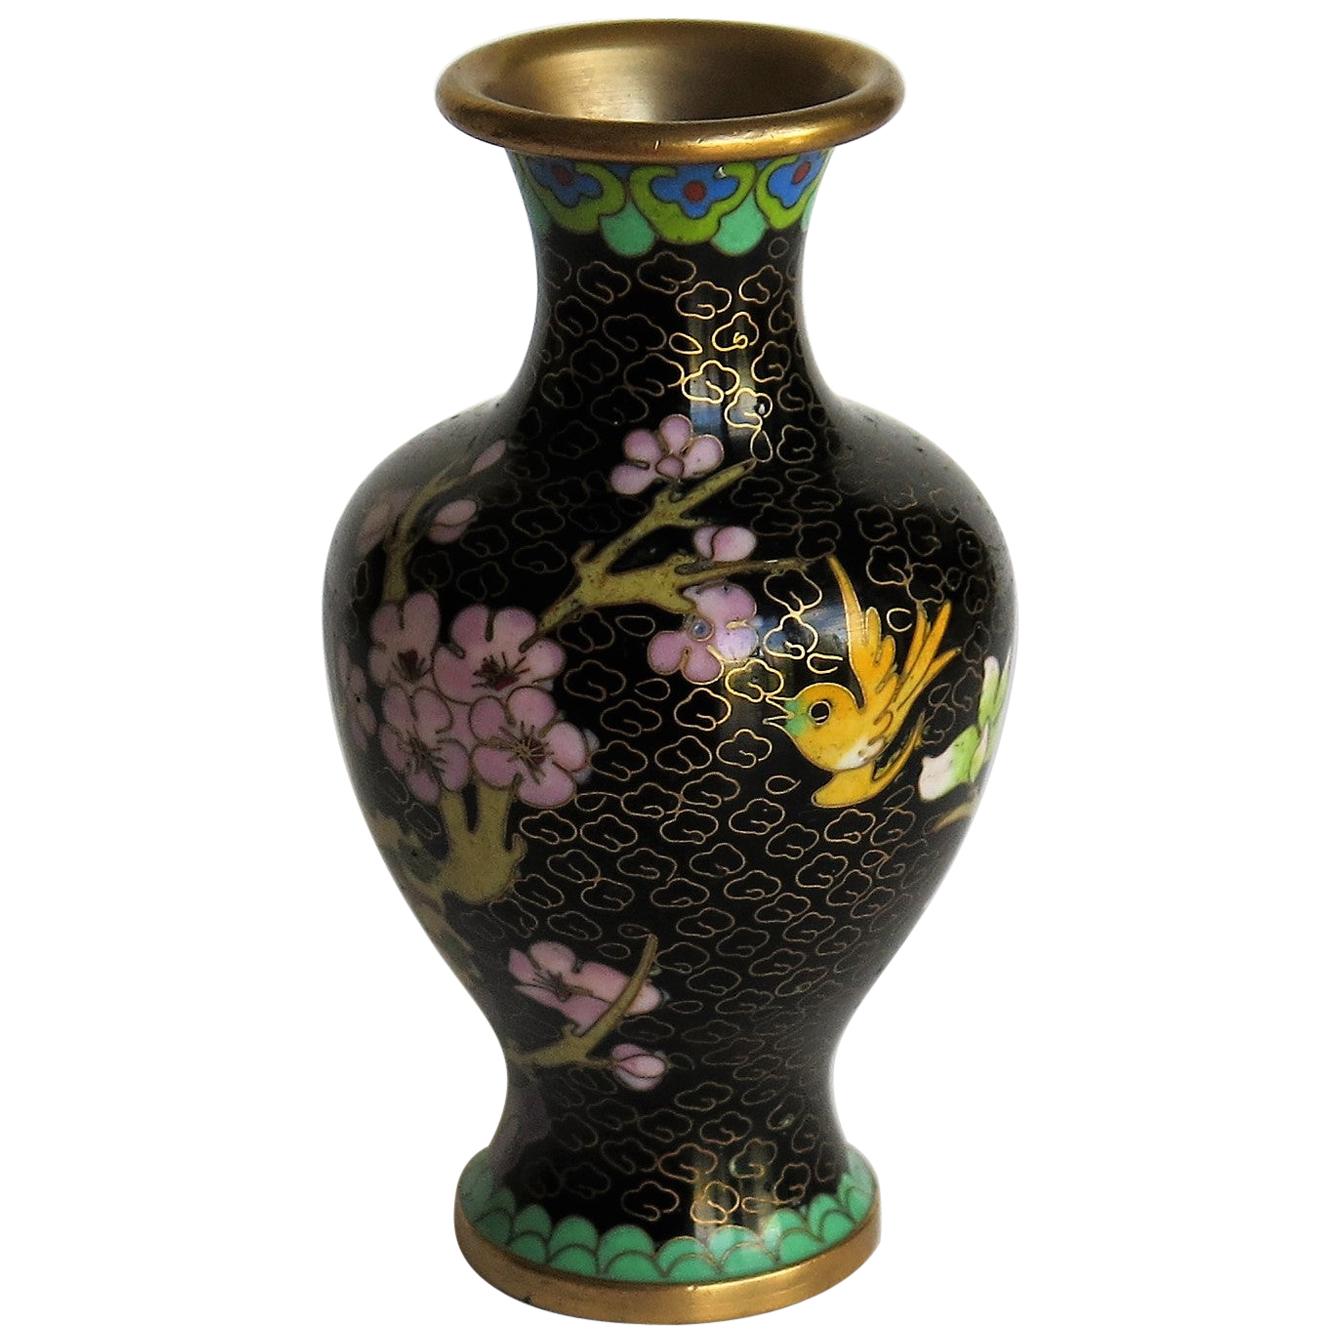 Chinese Cloisonne Vase with Yellow Bird and Blossoms, circa 1940